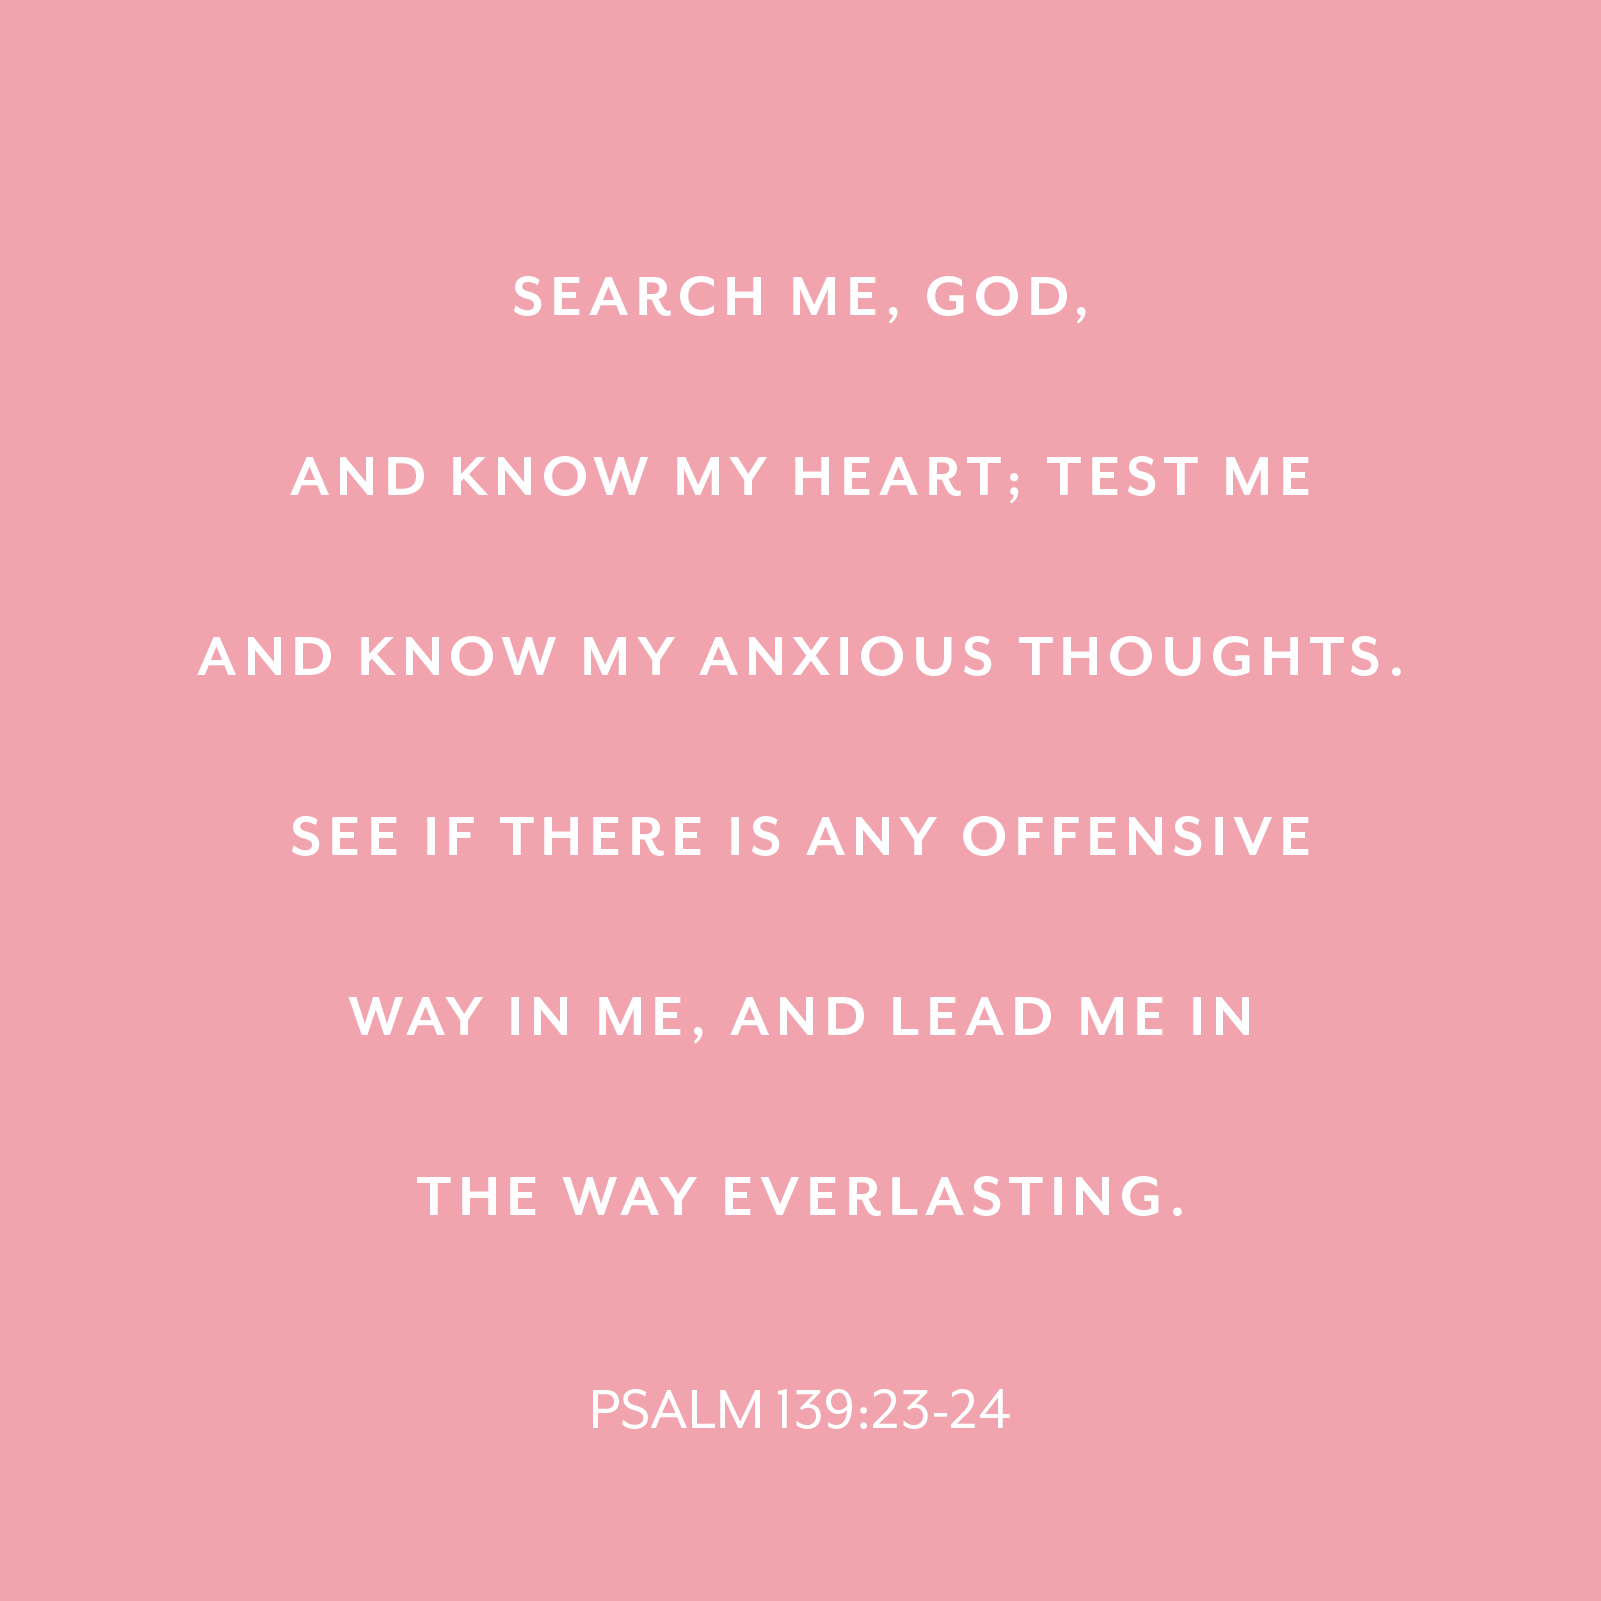 PSALM 139:24-25 | "Search me, God, and know my heart; test me and know my anxious thoughts. See if there is any offensive way in me, and lead me in the way everlasting.” | Week 1 Verse |  #DangerousPrayers #P31OBS